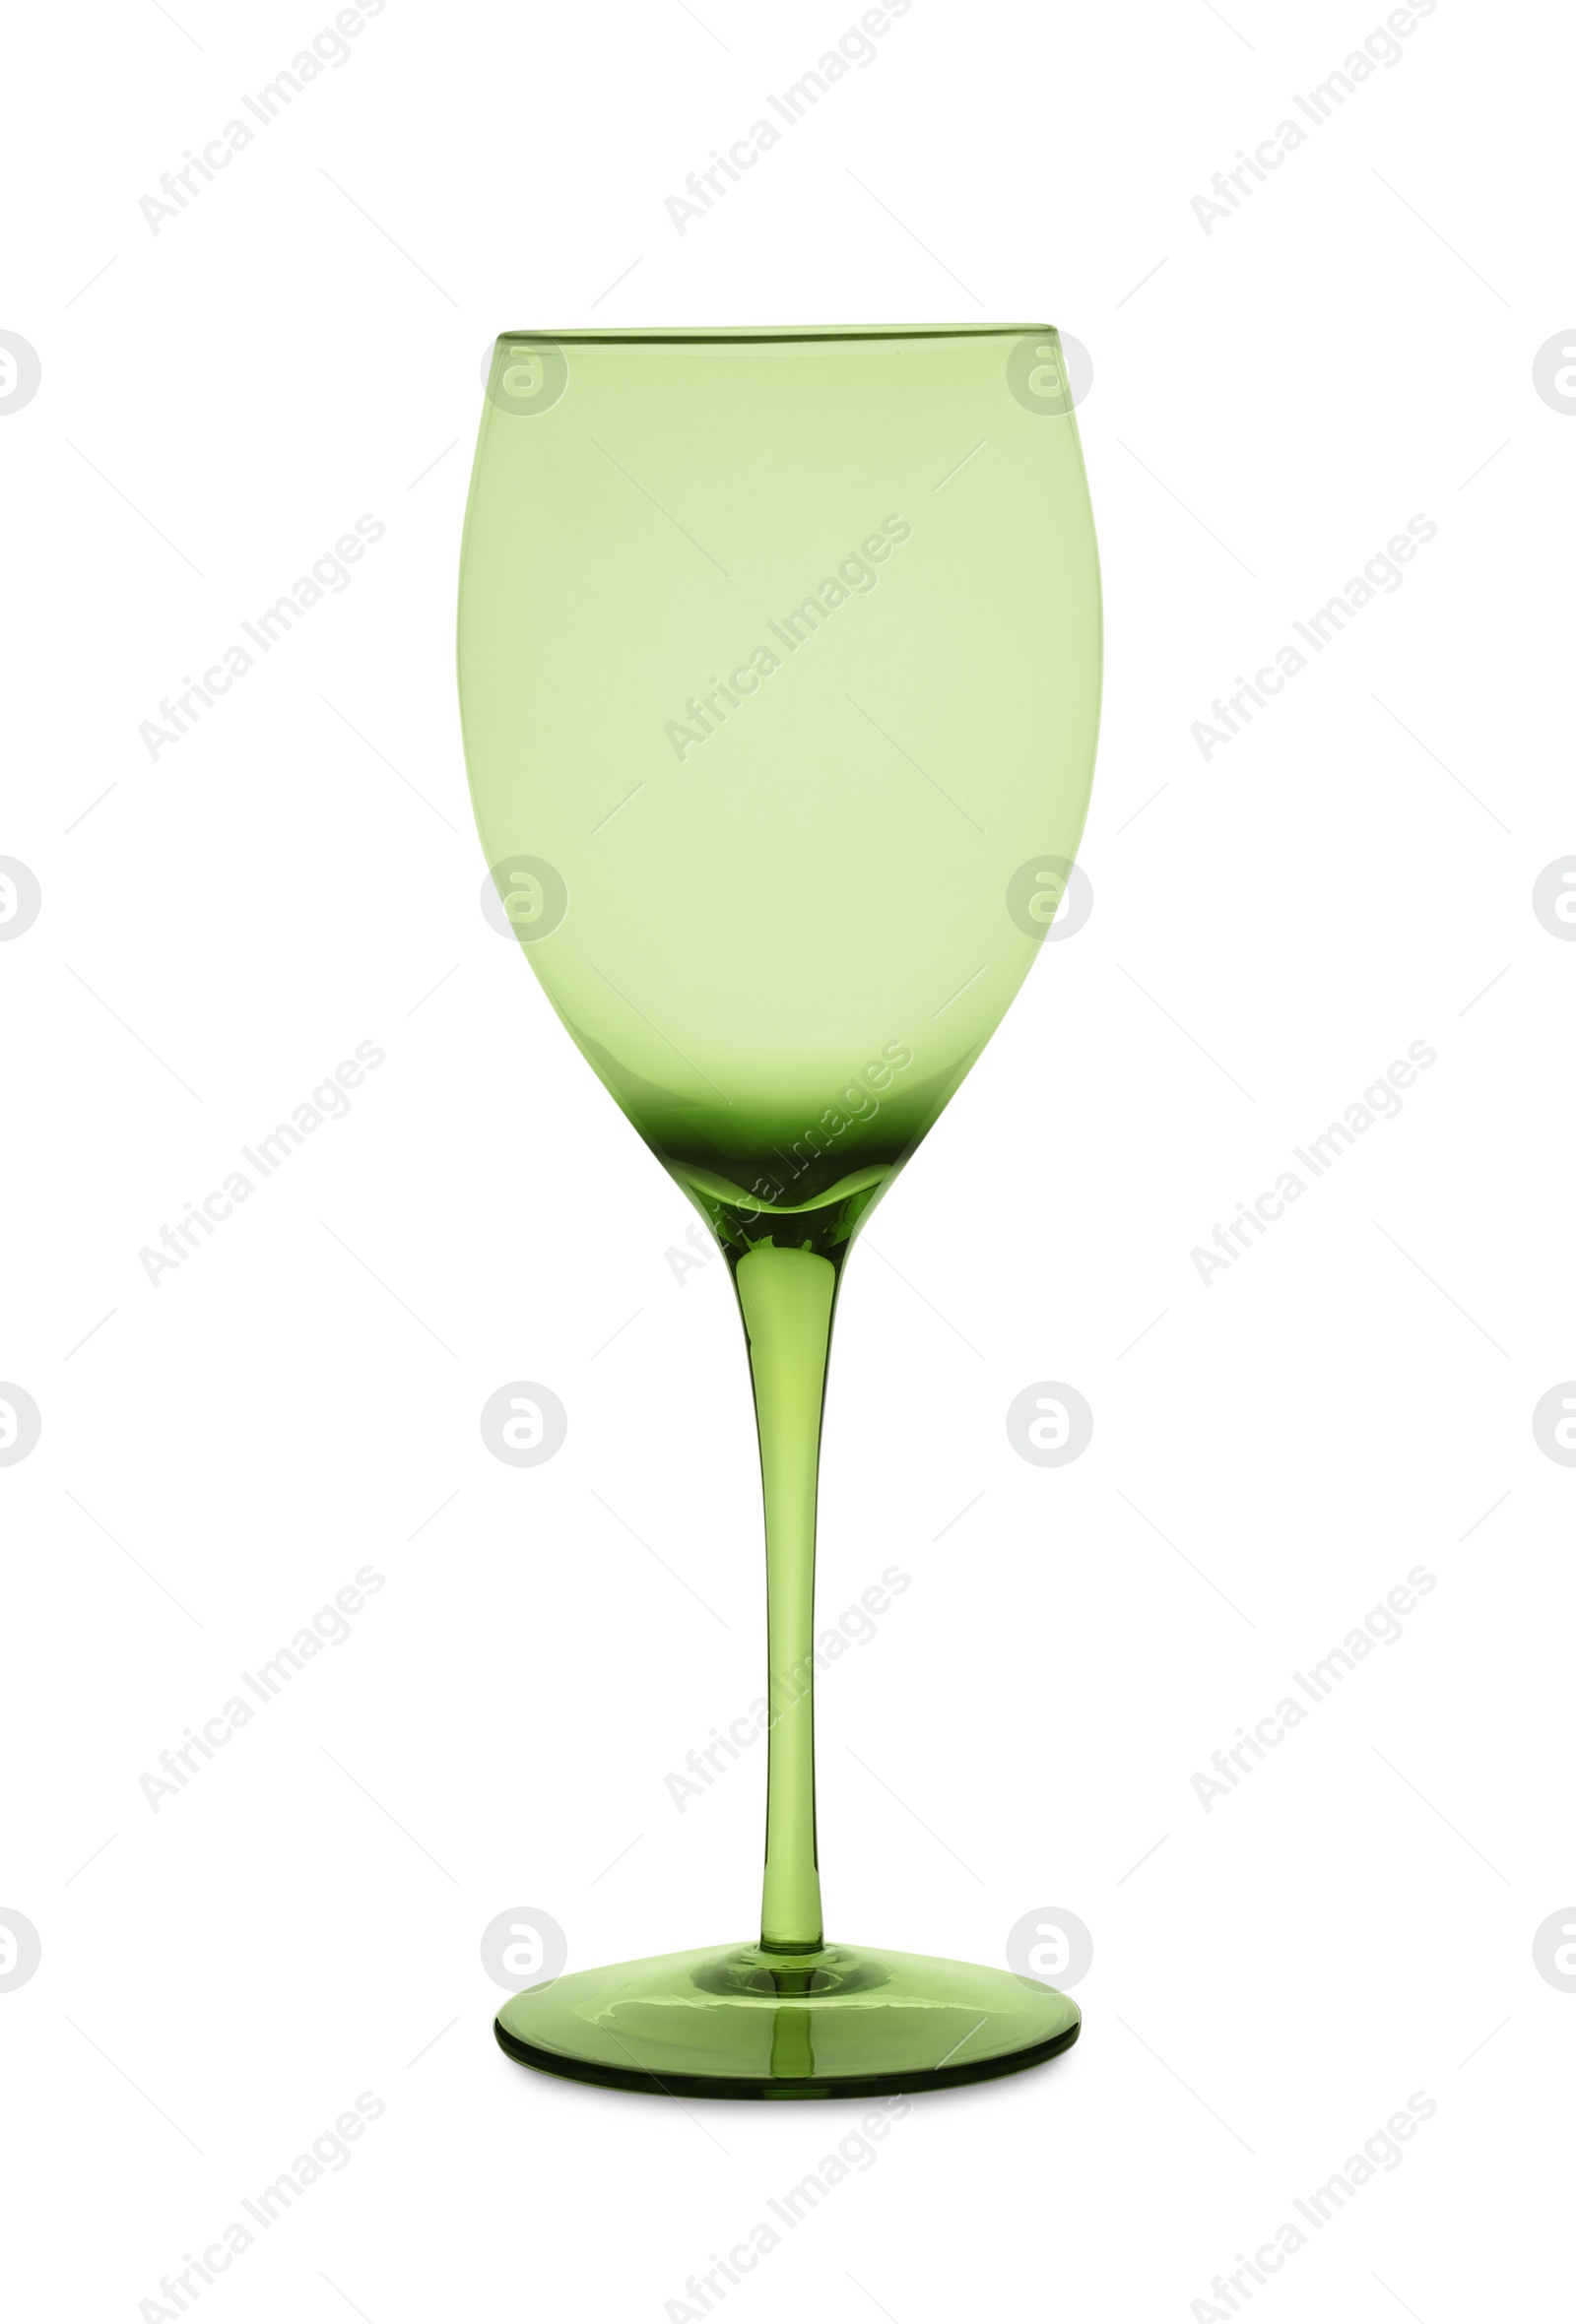 Photo of Empty green wine glass isolated on white